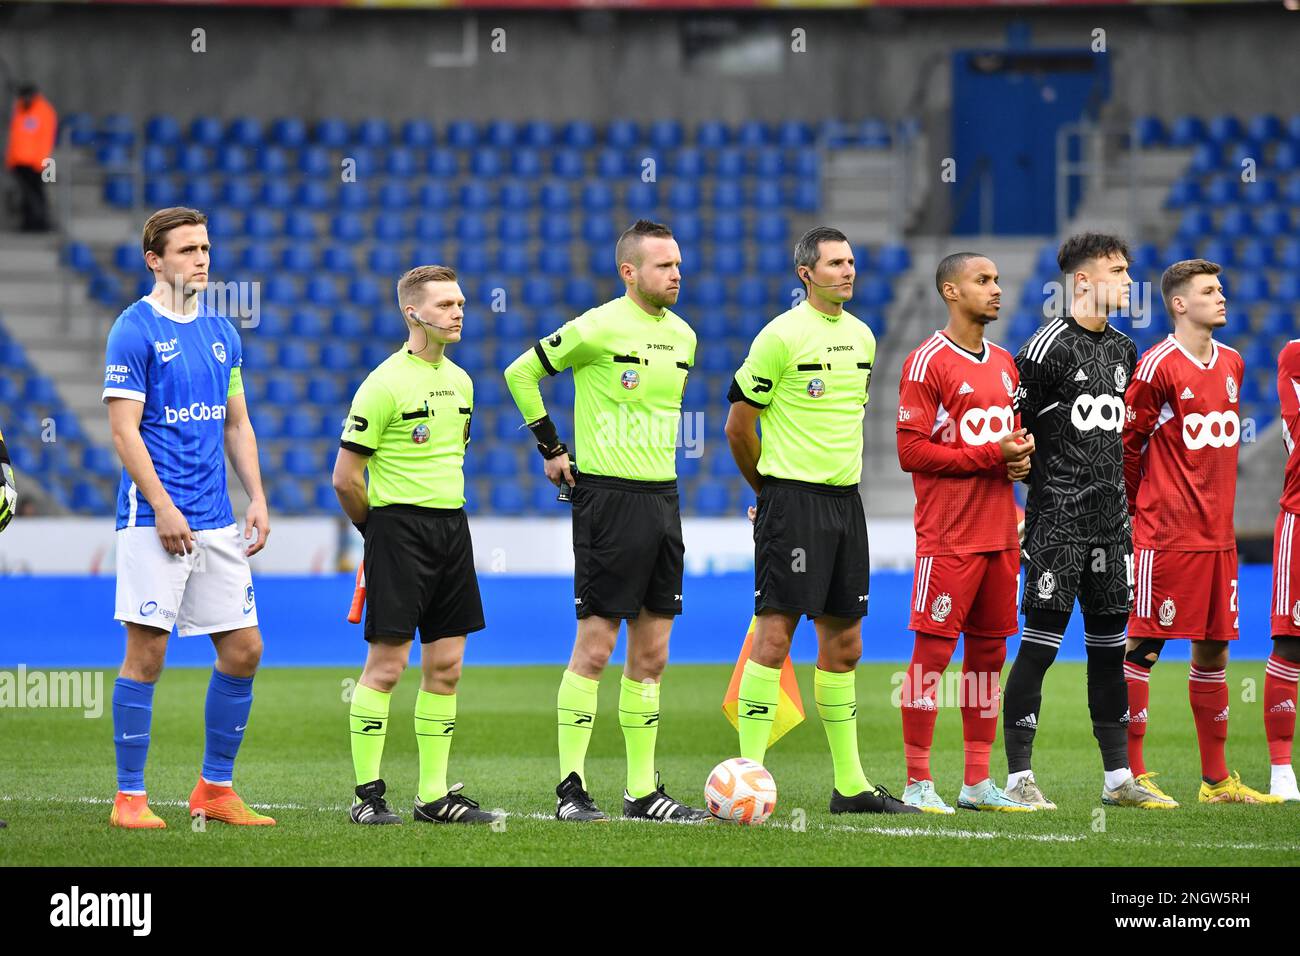 referees (C) and players pictured at a soccer match between Jong Genk (U23) and SL16 (Standard U23), Sunday 19 February 2023 in Lommel, a postponed game of day 19 of the 2022-2023 'Challenger Pro League' 1B second division of the Belgian championship. BELGA PHOTO JILL DELSAUX Stock Photo